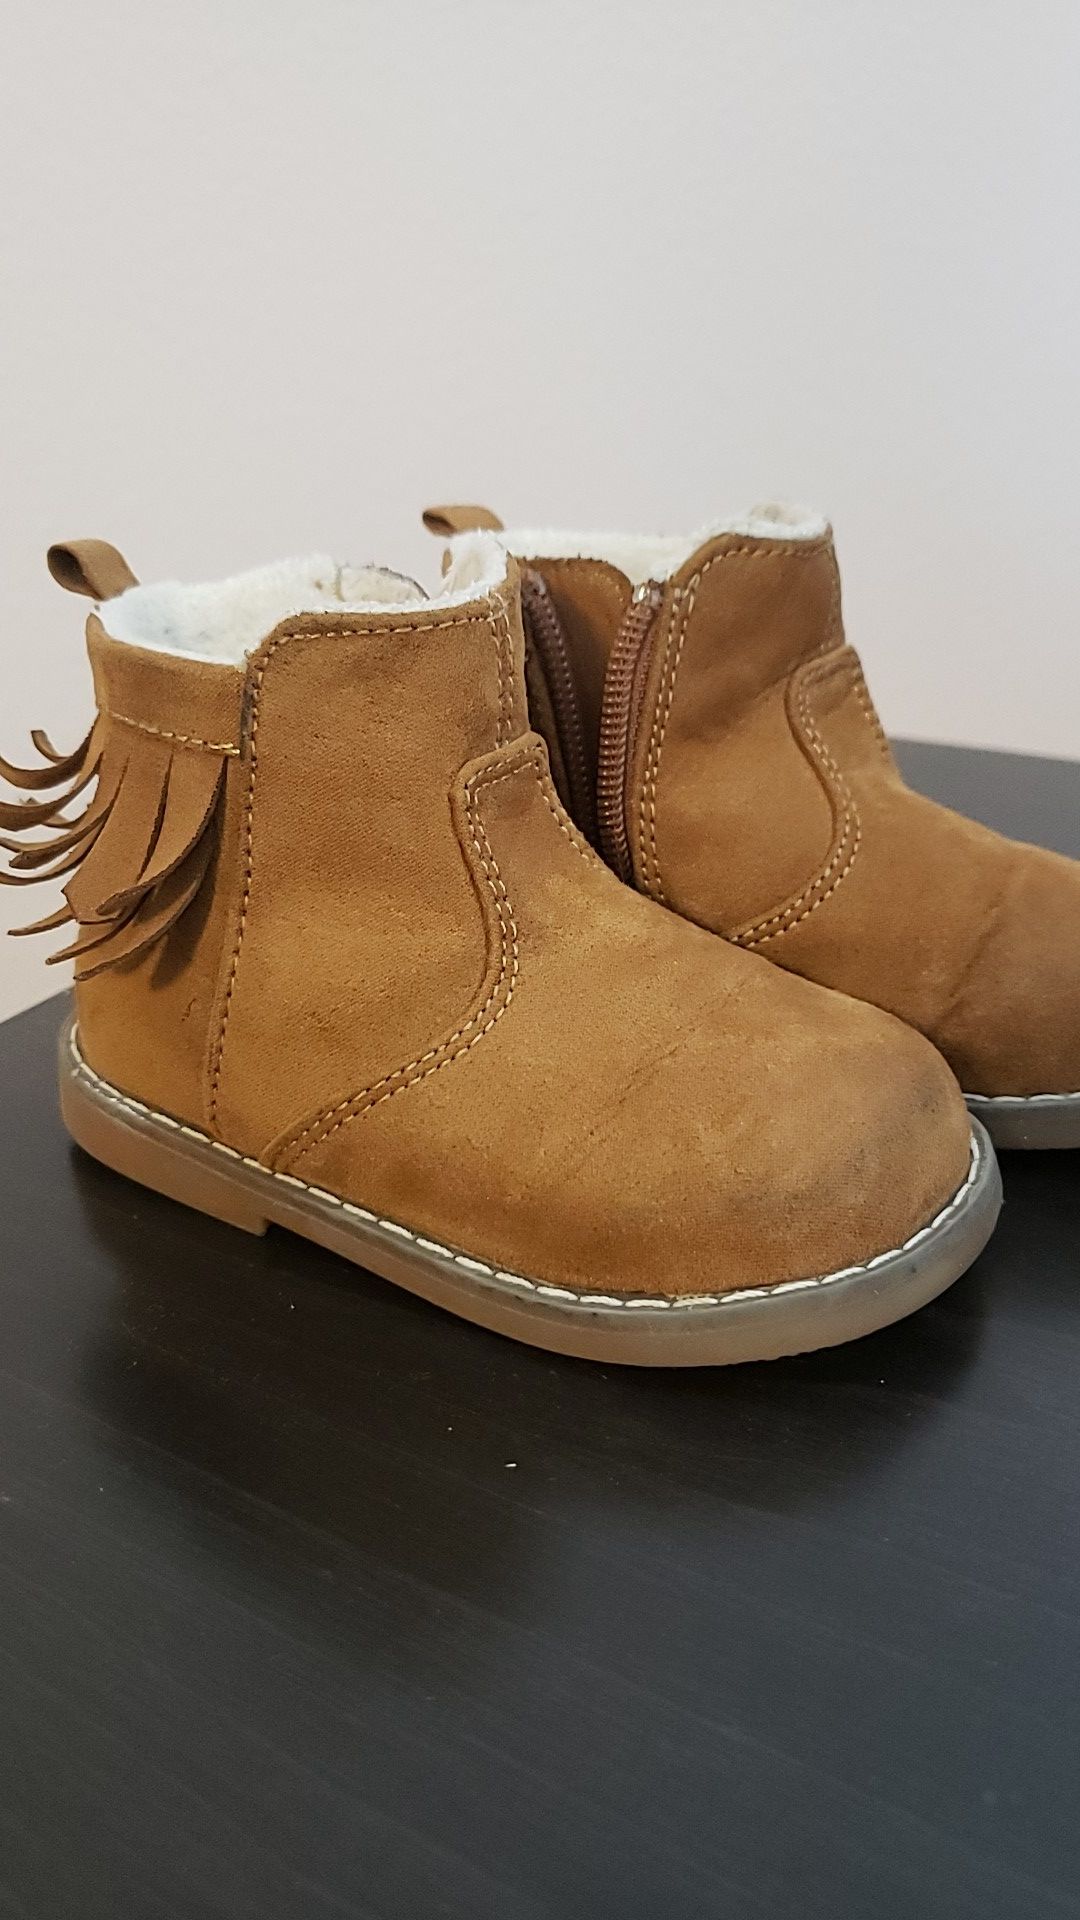 H&M Toddler girl boots